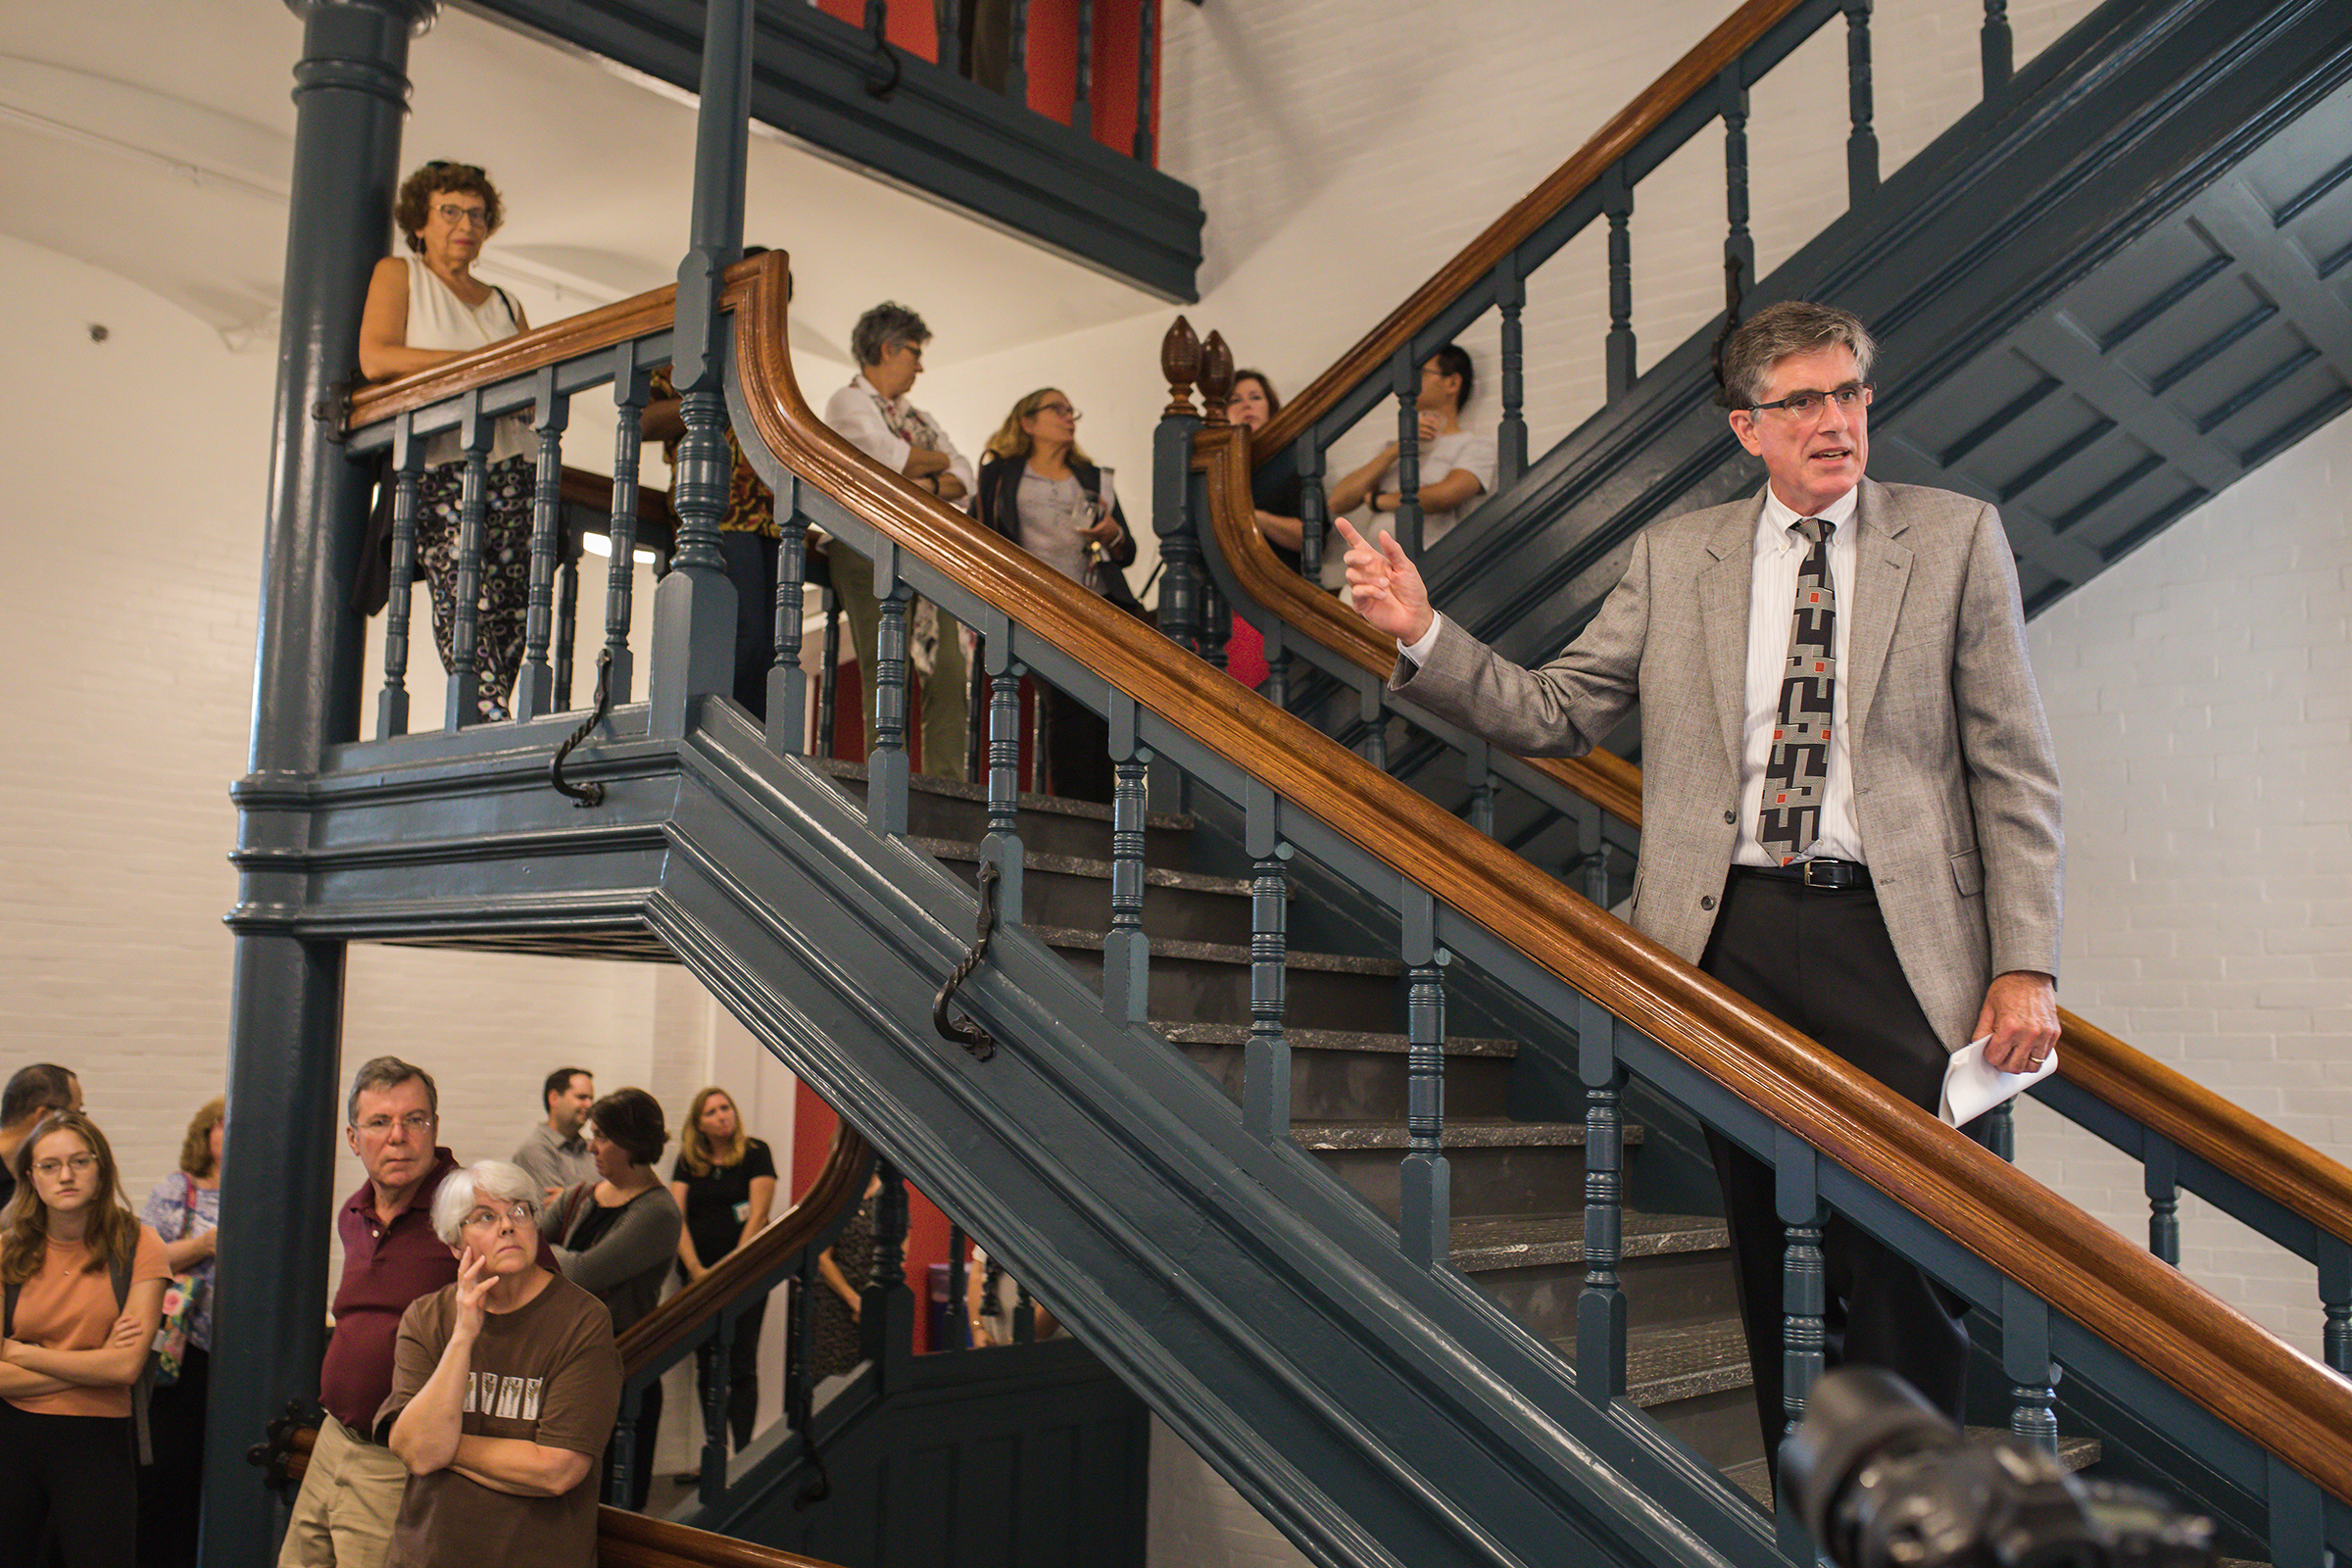 Lehigh Provost Pat Farrell speaks on the staircase at the open house for the newly renovated Chandler-Ullmann Hall.